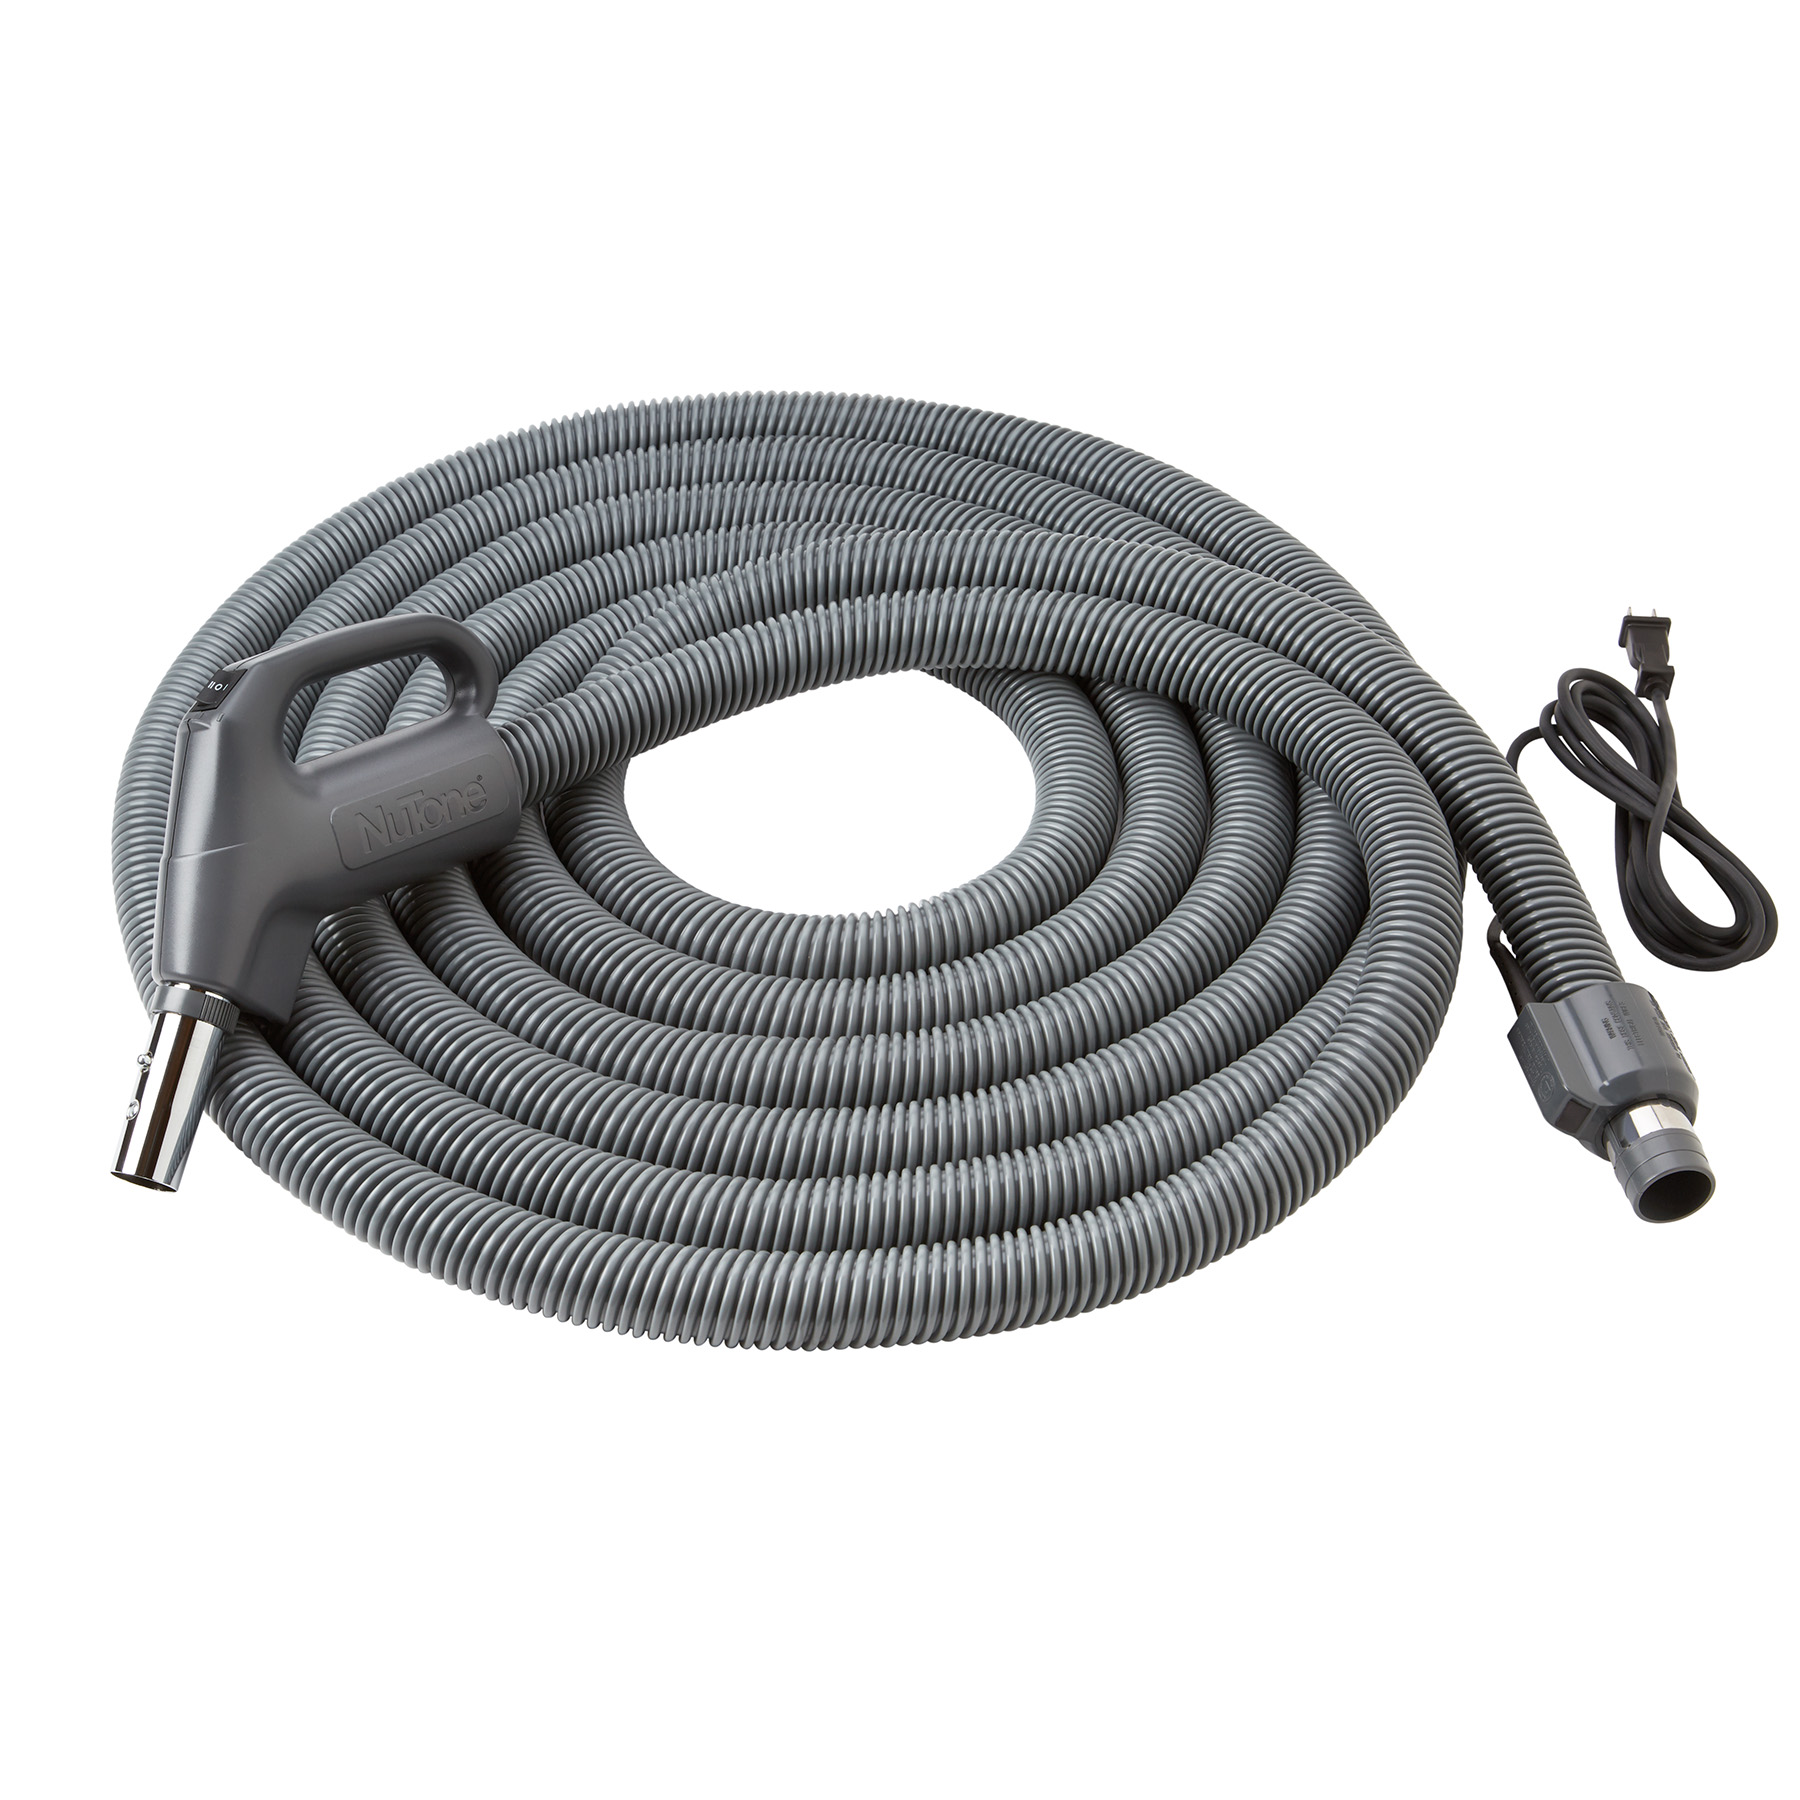 NuTone® 30' Current-Carrying Crushproof Hose